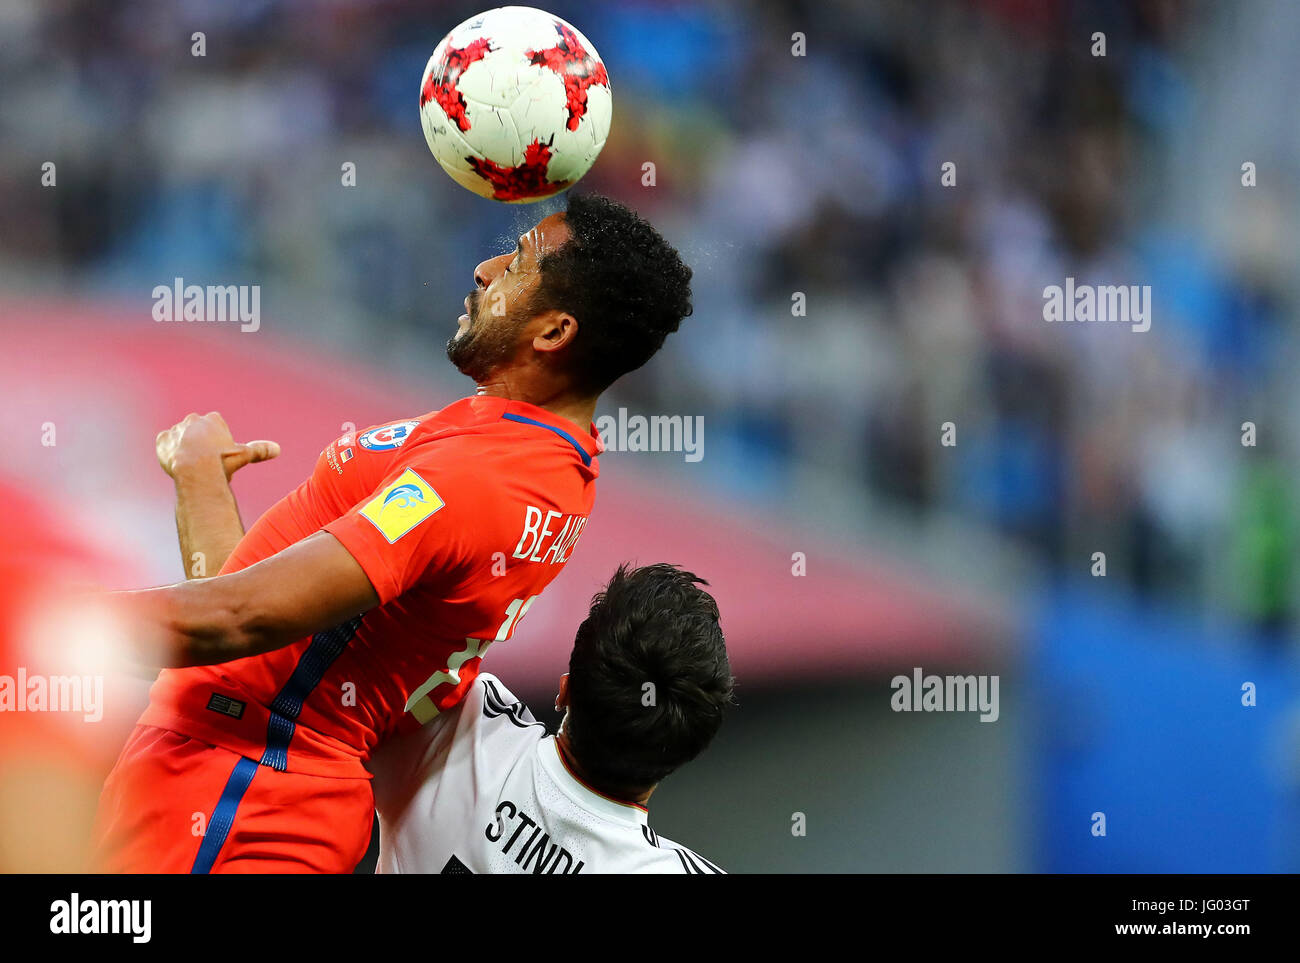 St Petersburg, Russia. 2nd July, 2017. CHILE VS GERMANY - Jean Beausejour of Chile contests with Lars Stindl of Germany during a match between Chile and Germany at the 2017 Confederations Cup Final this Sunday (02), held at the Krestovsky Stadium (Zenit Arena) in St. Petersburg, Russia. (Photo: Heuler Andrey/DiaEsportivo/Fotoarena/Alamy Live News) Stock Photo